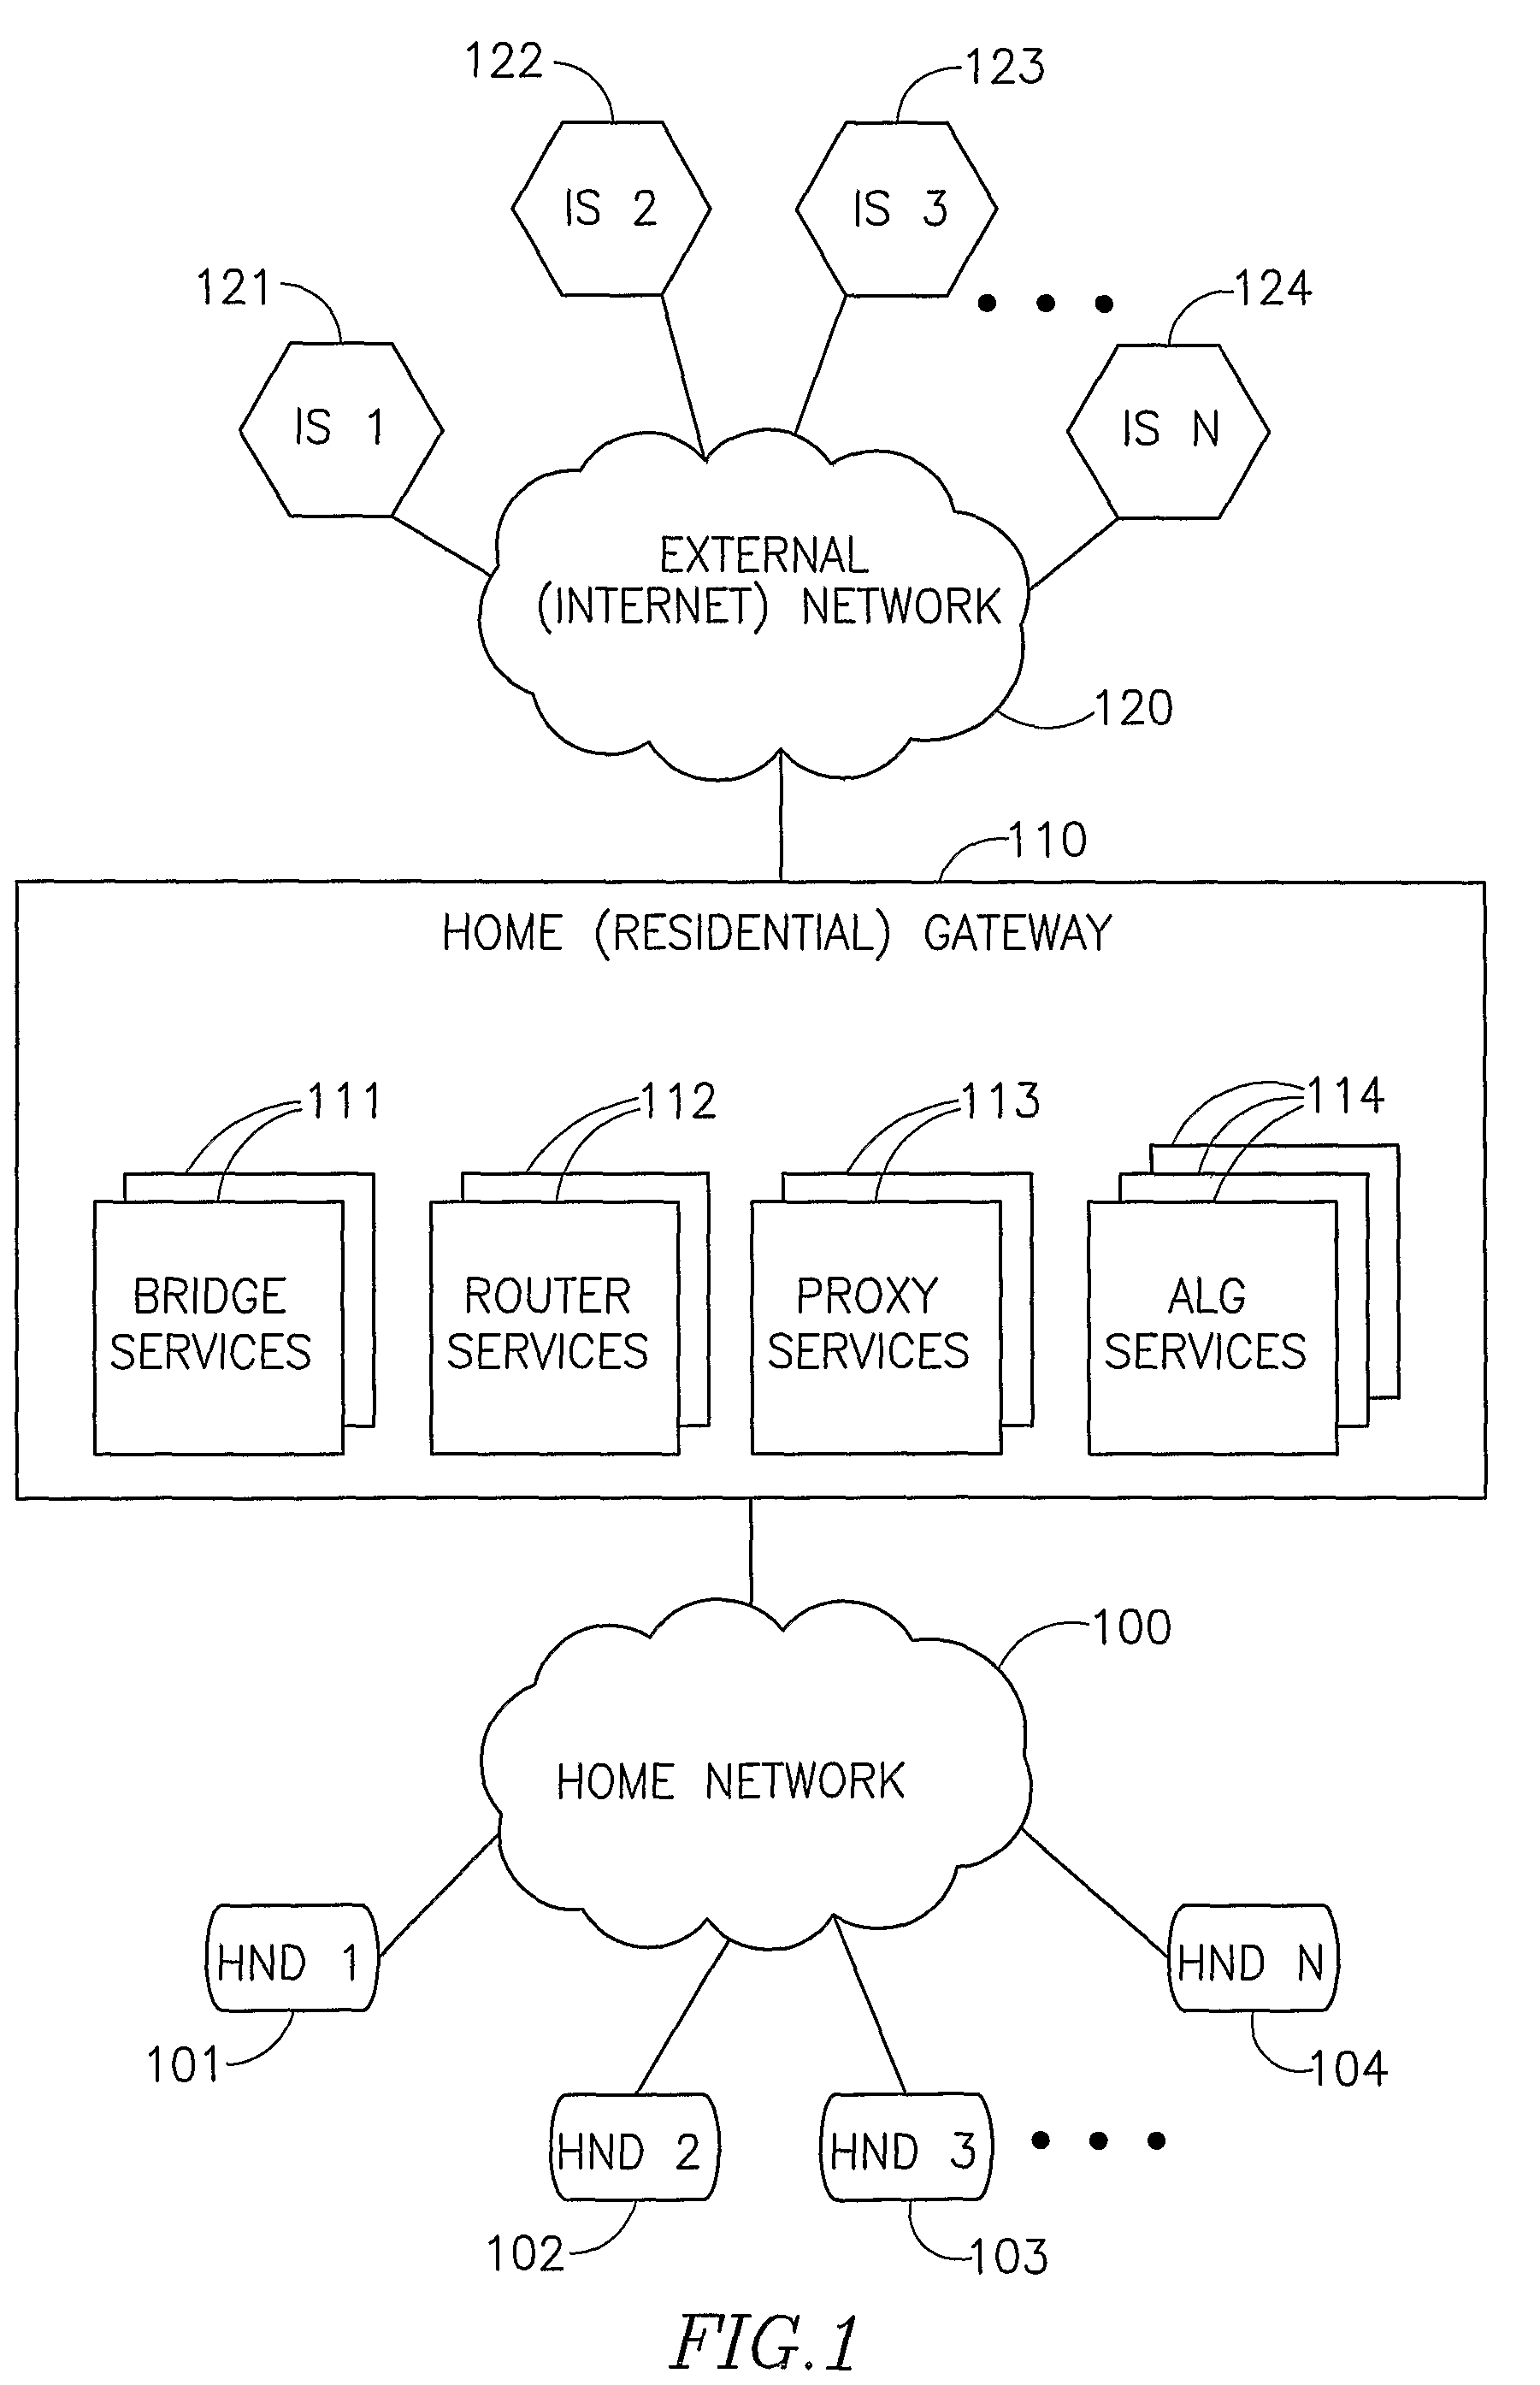 Architecture of gateway between a home network and an external network